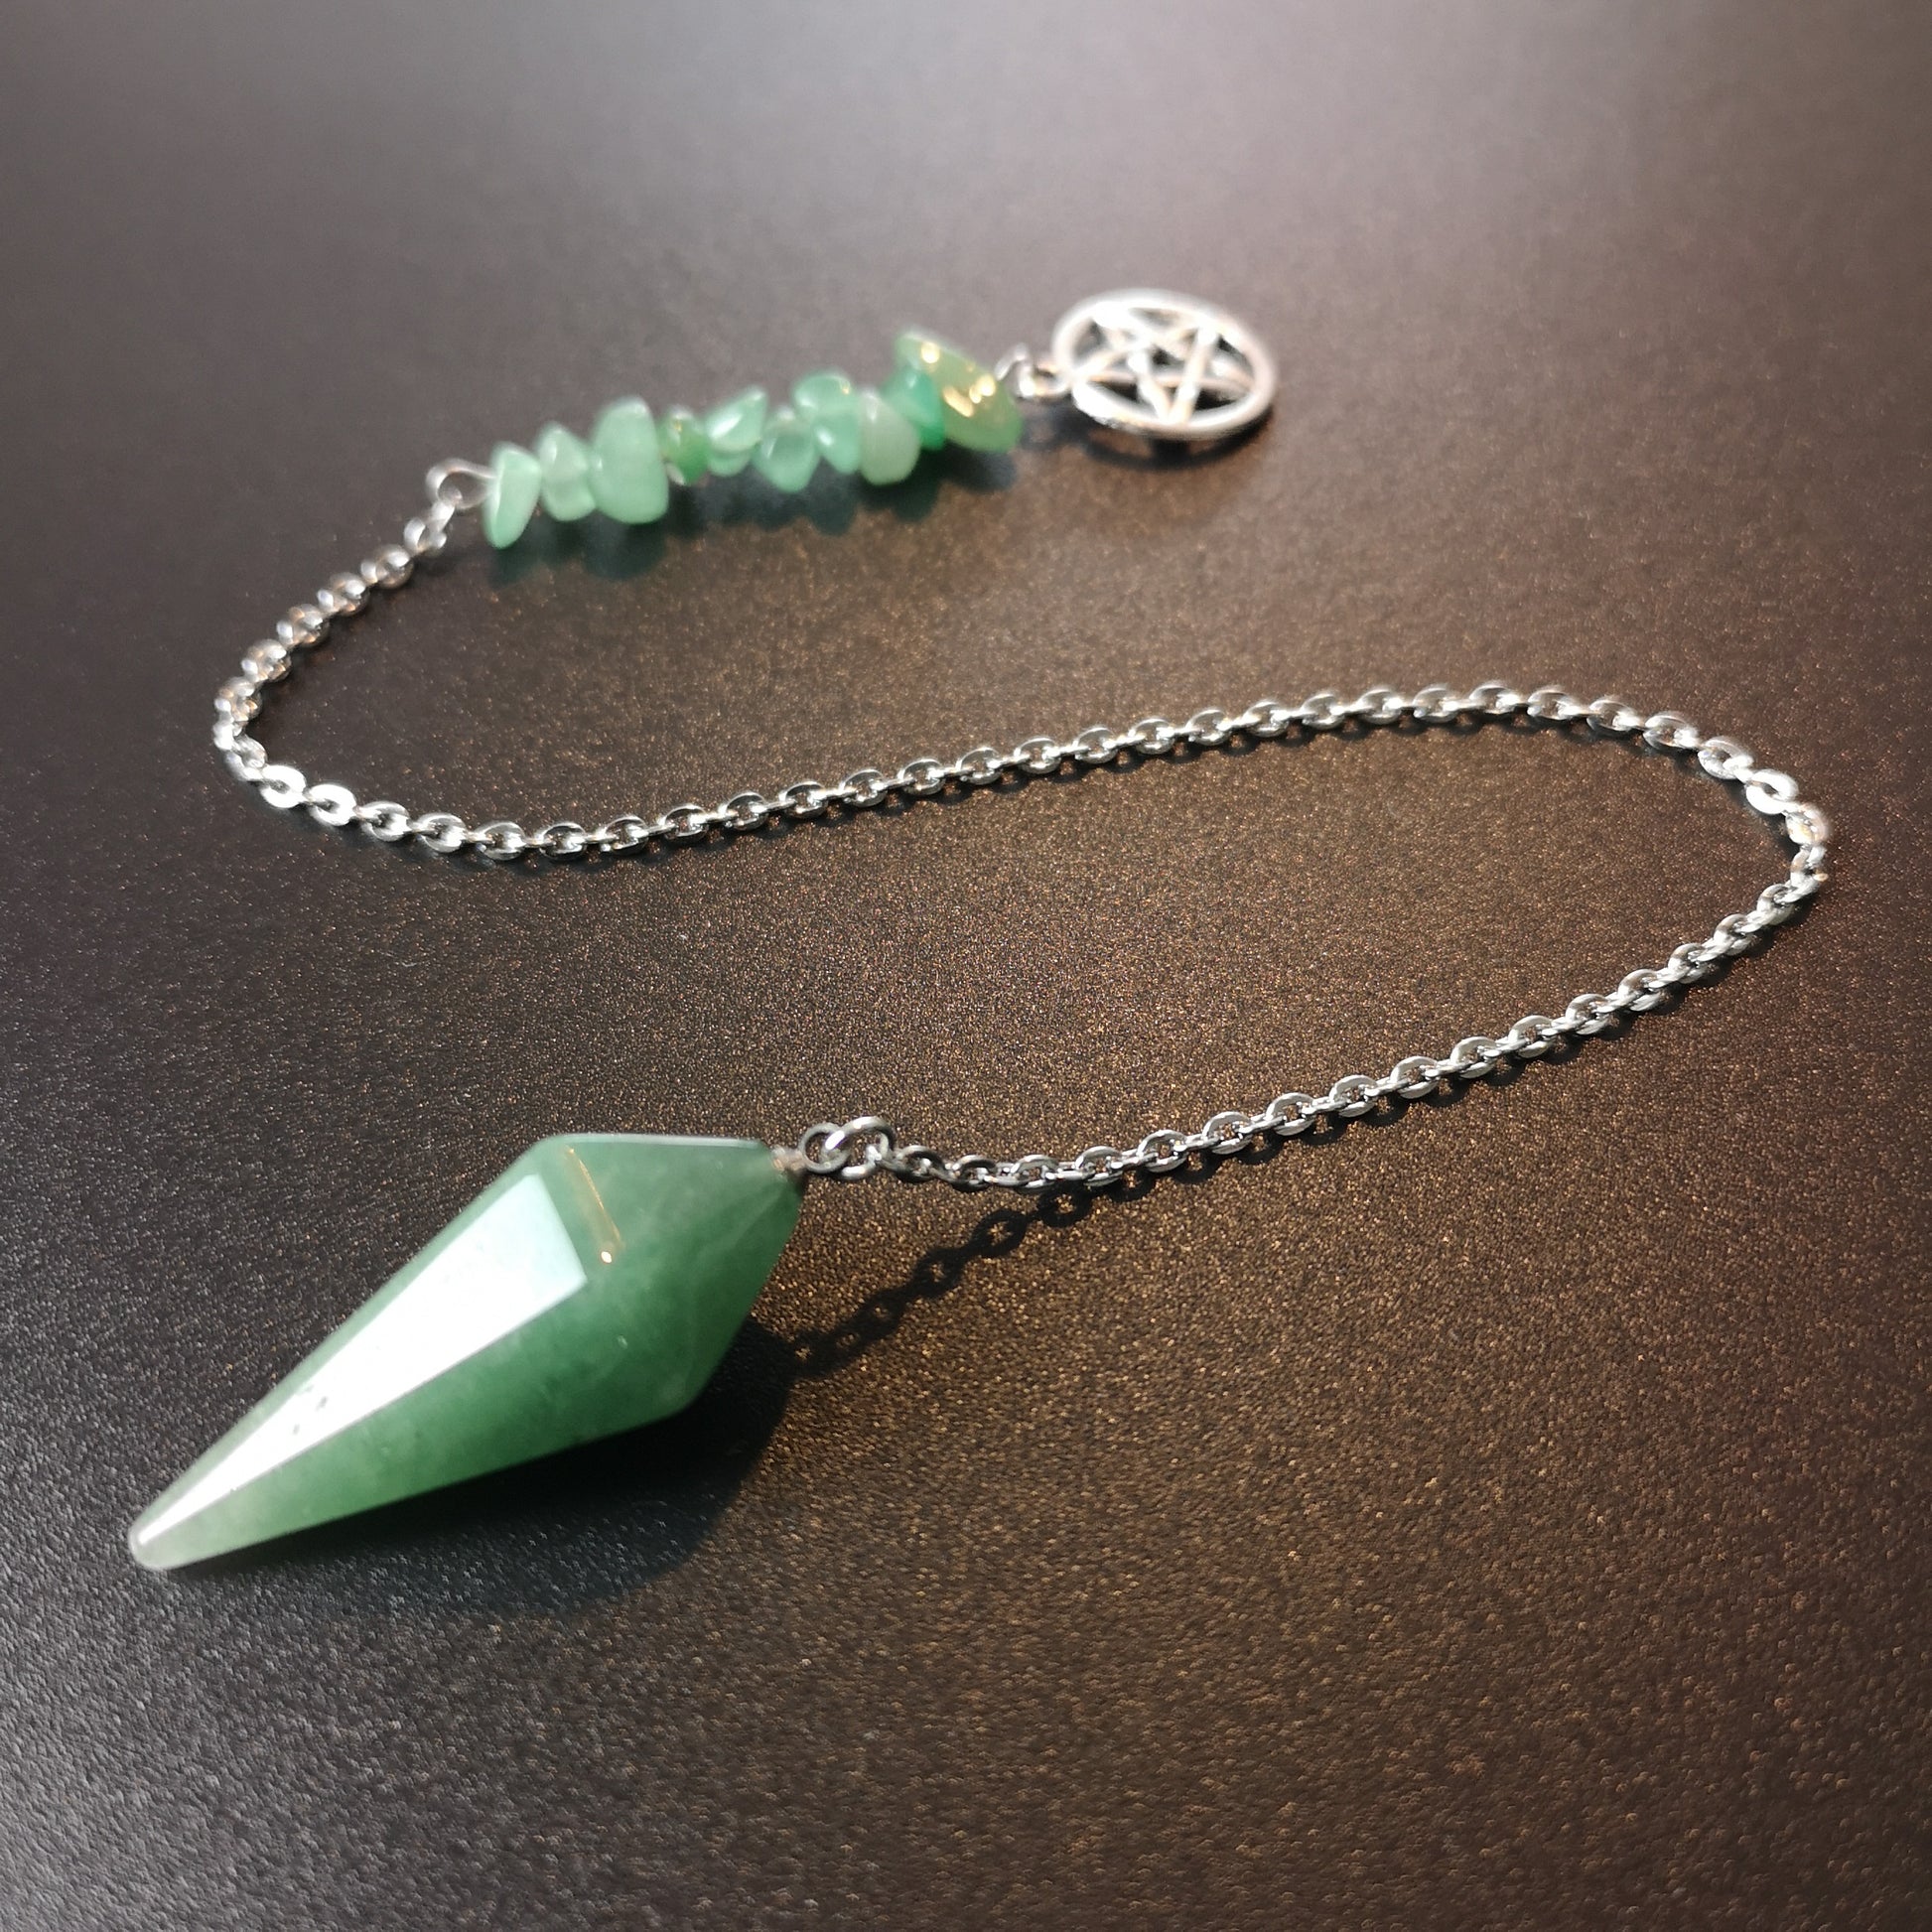 Aventurine and pentacle wiccan pendulum - The French Witch shop